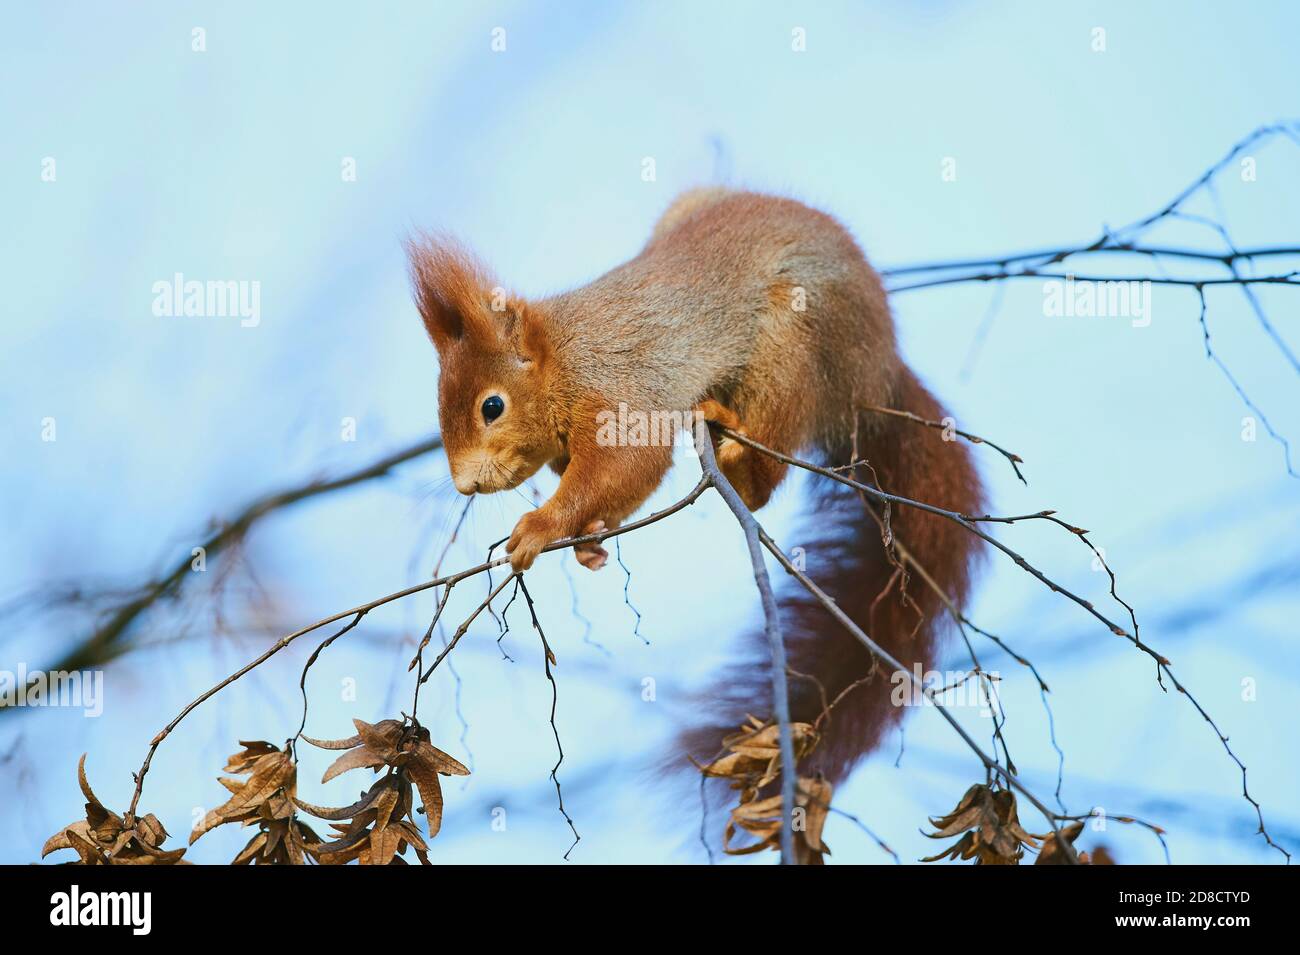 European red squirrel, Eurasian red squirrel (Sciurus vulgaris), climbing on a branch in winter, side view, Germany, Bavaria Stock Photo